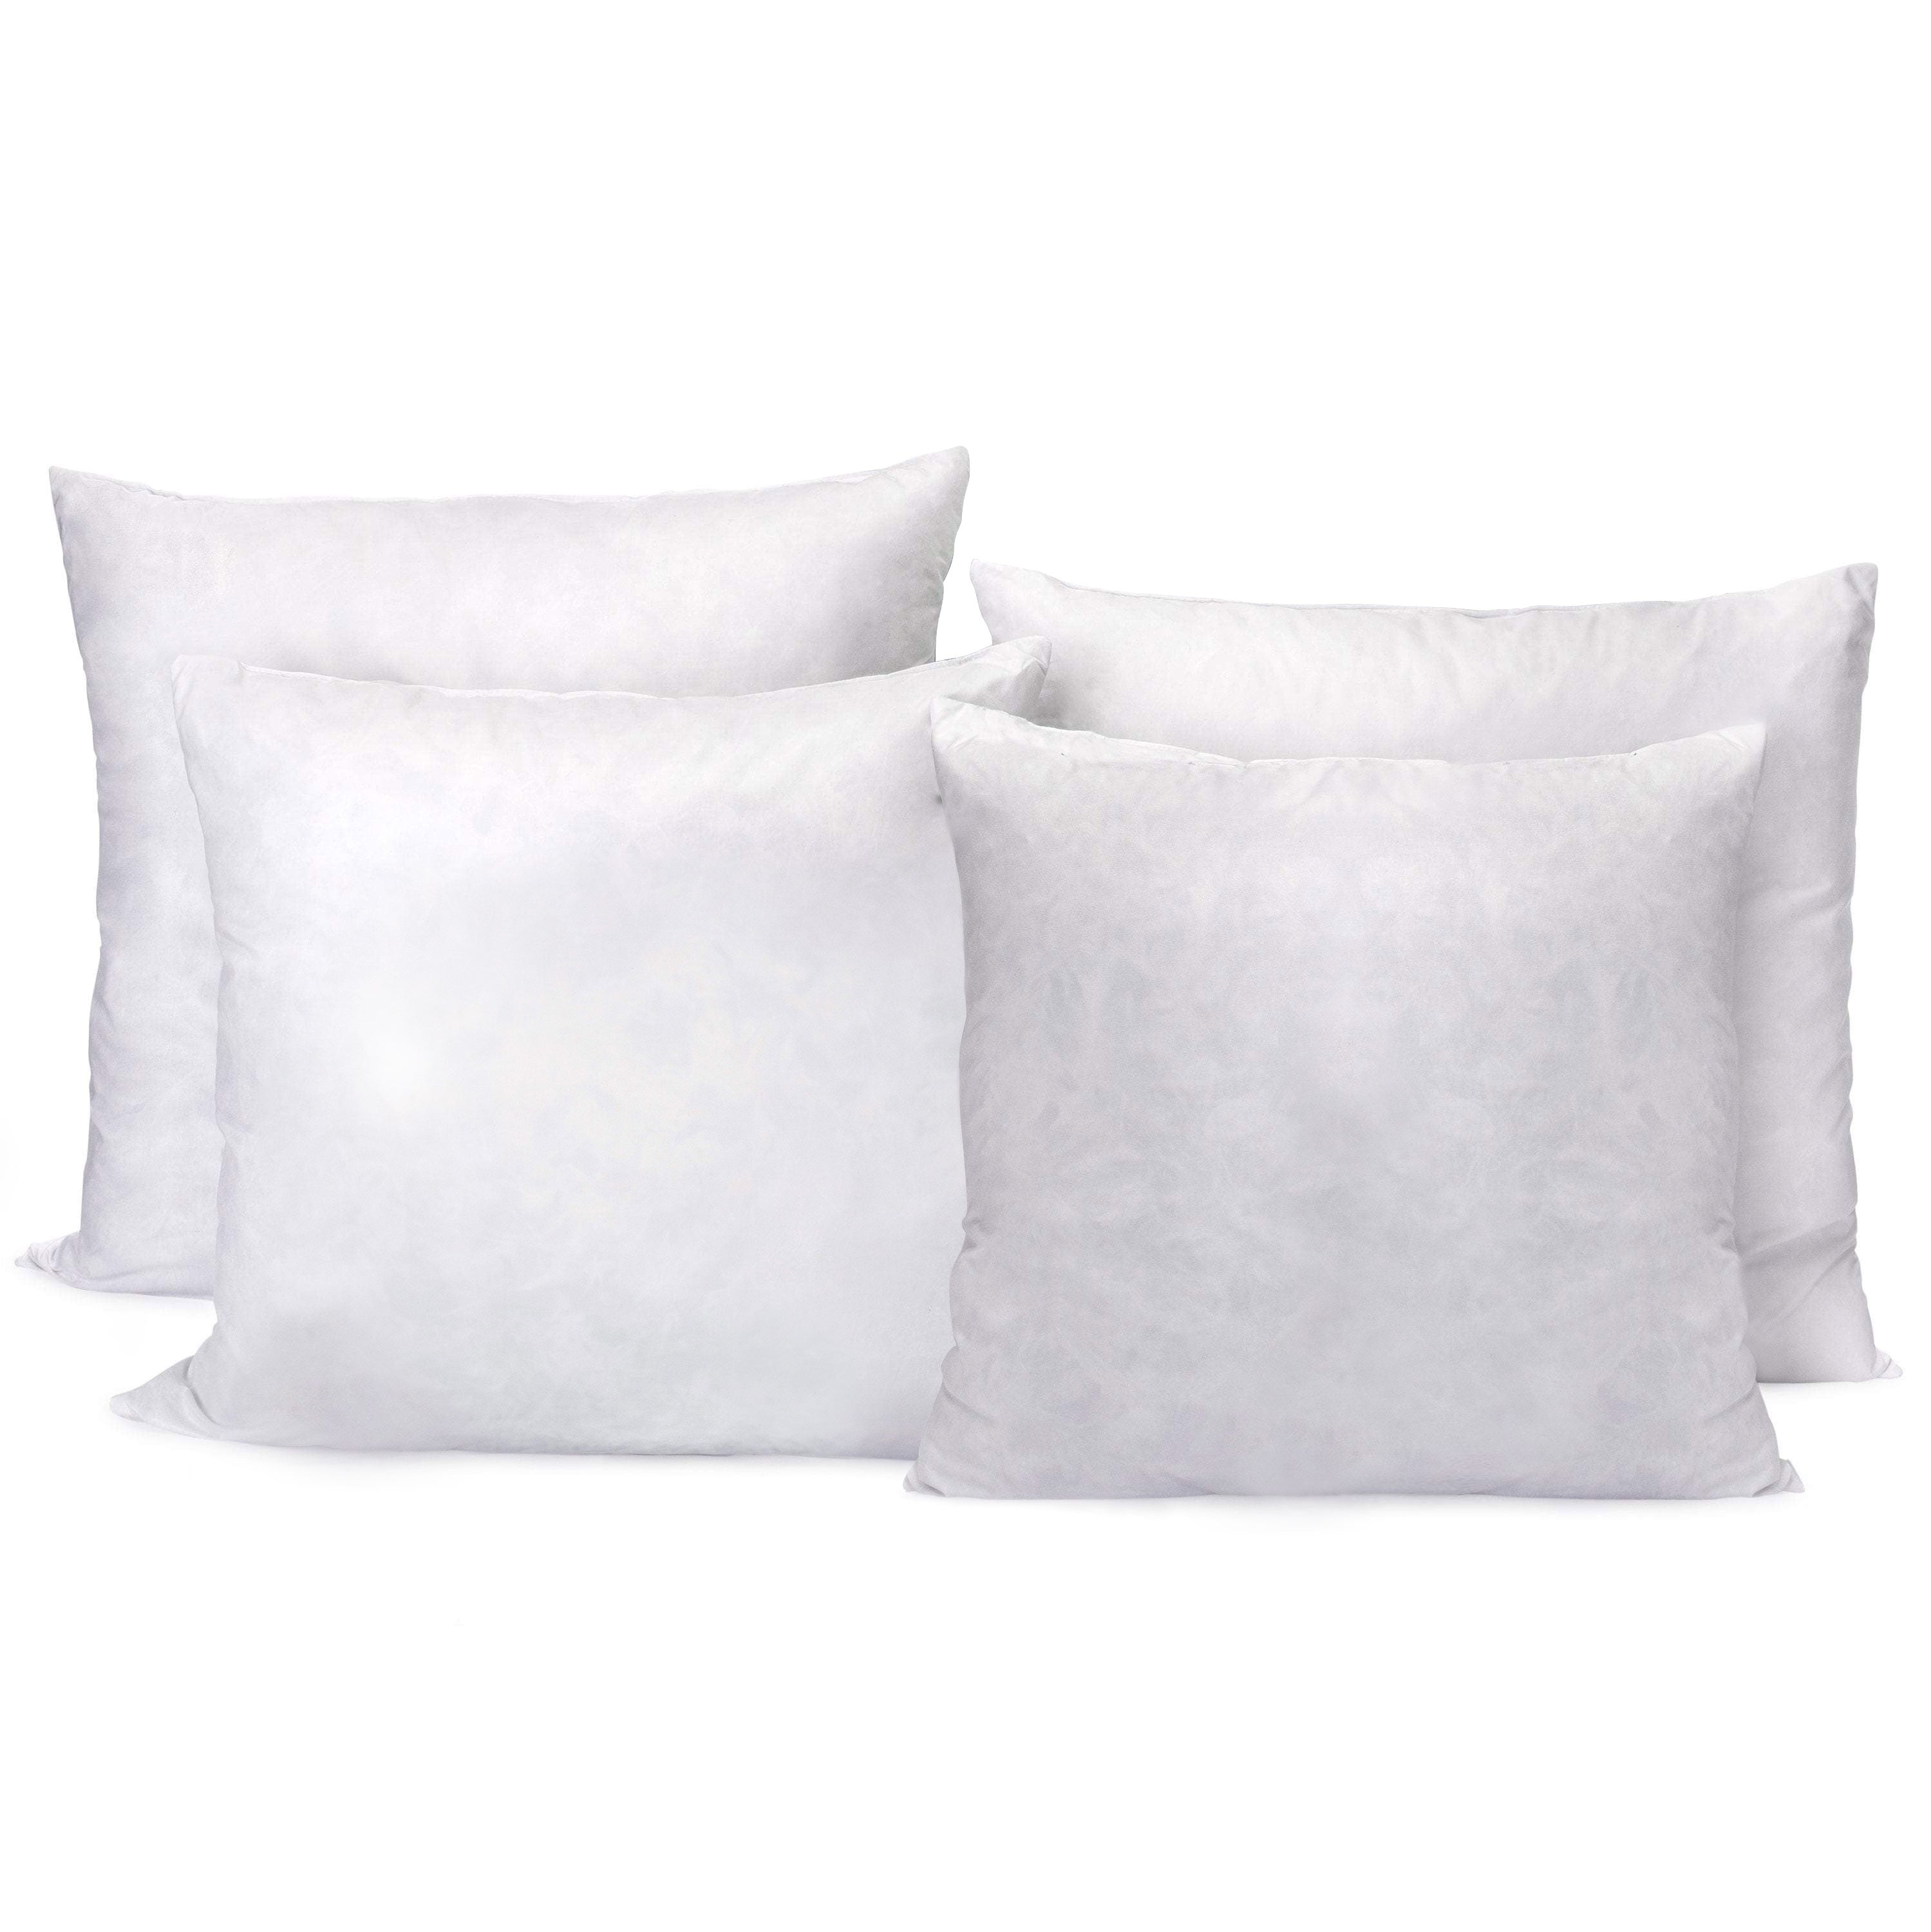 Down Feather Throw Pillow Inserts 20x20 Set of 2 Square Form Sham Stuffer  Premium Hypoallergenic Cotton Lumbar White Decorative Sofa Cushion Couch